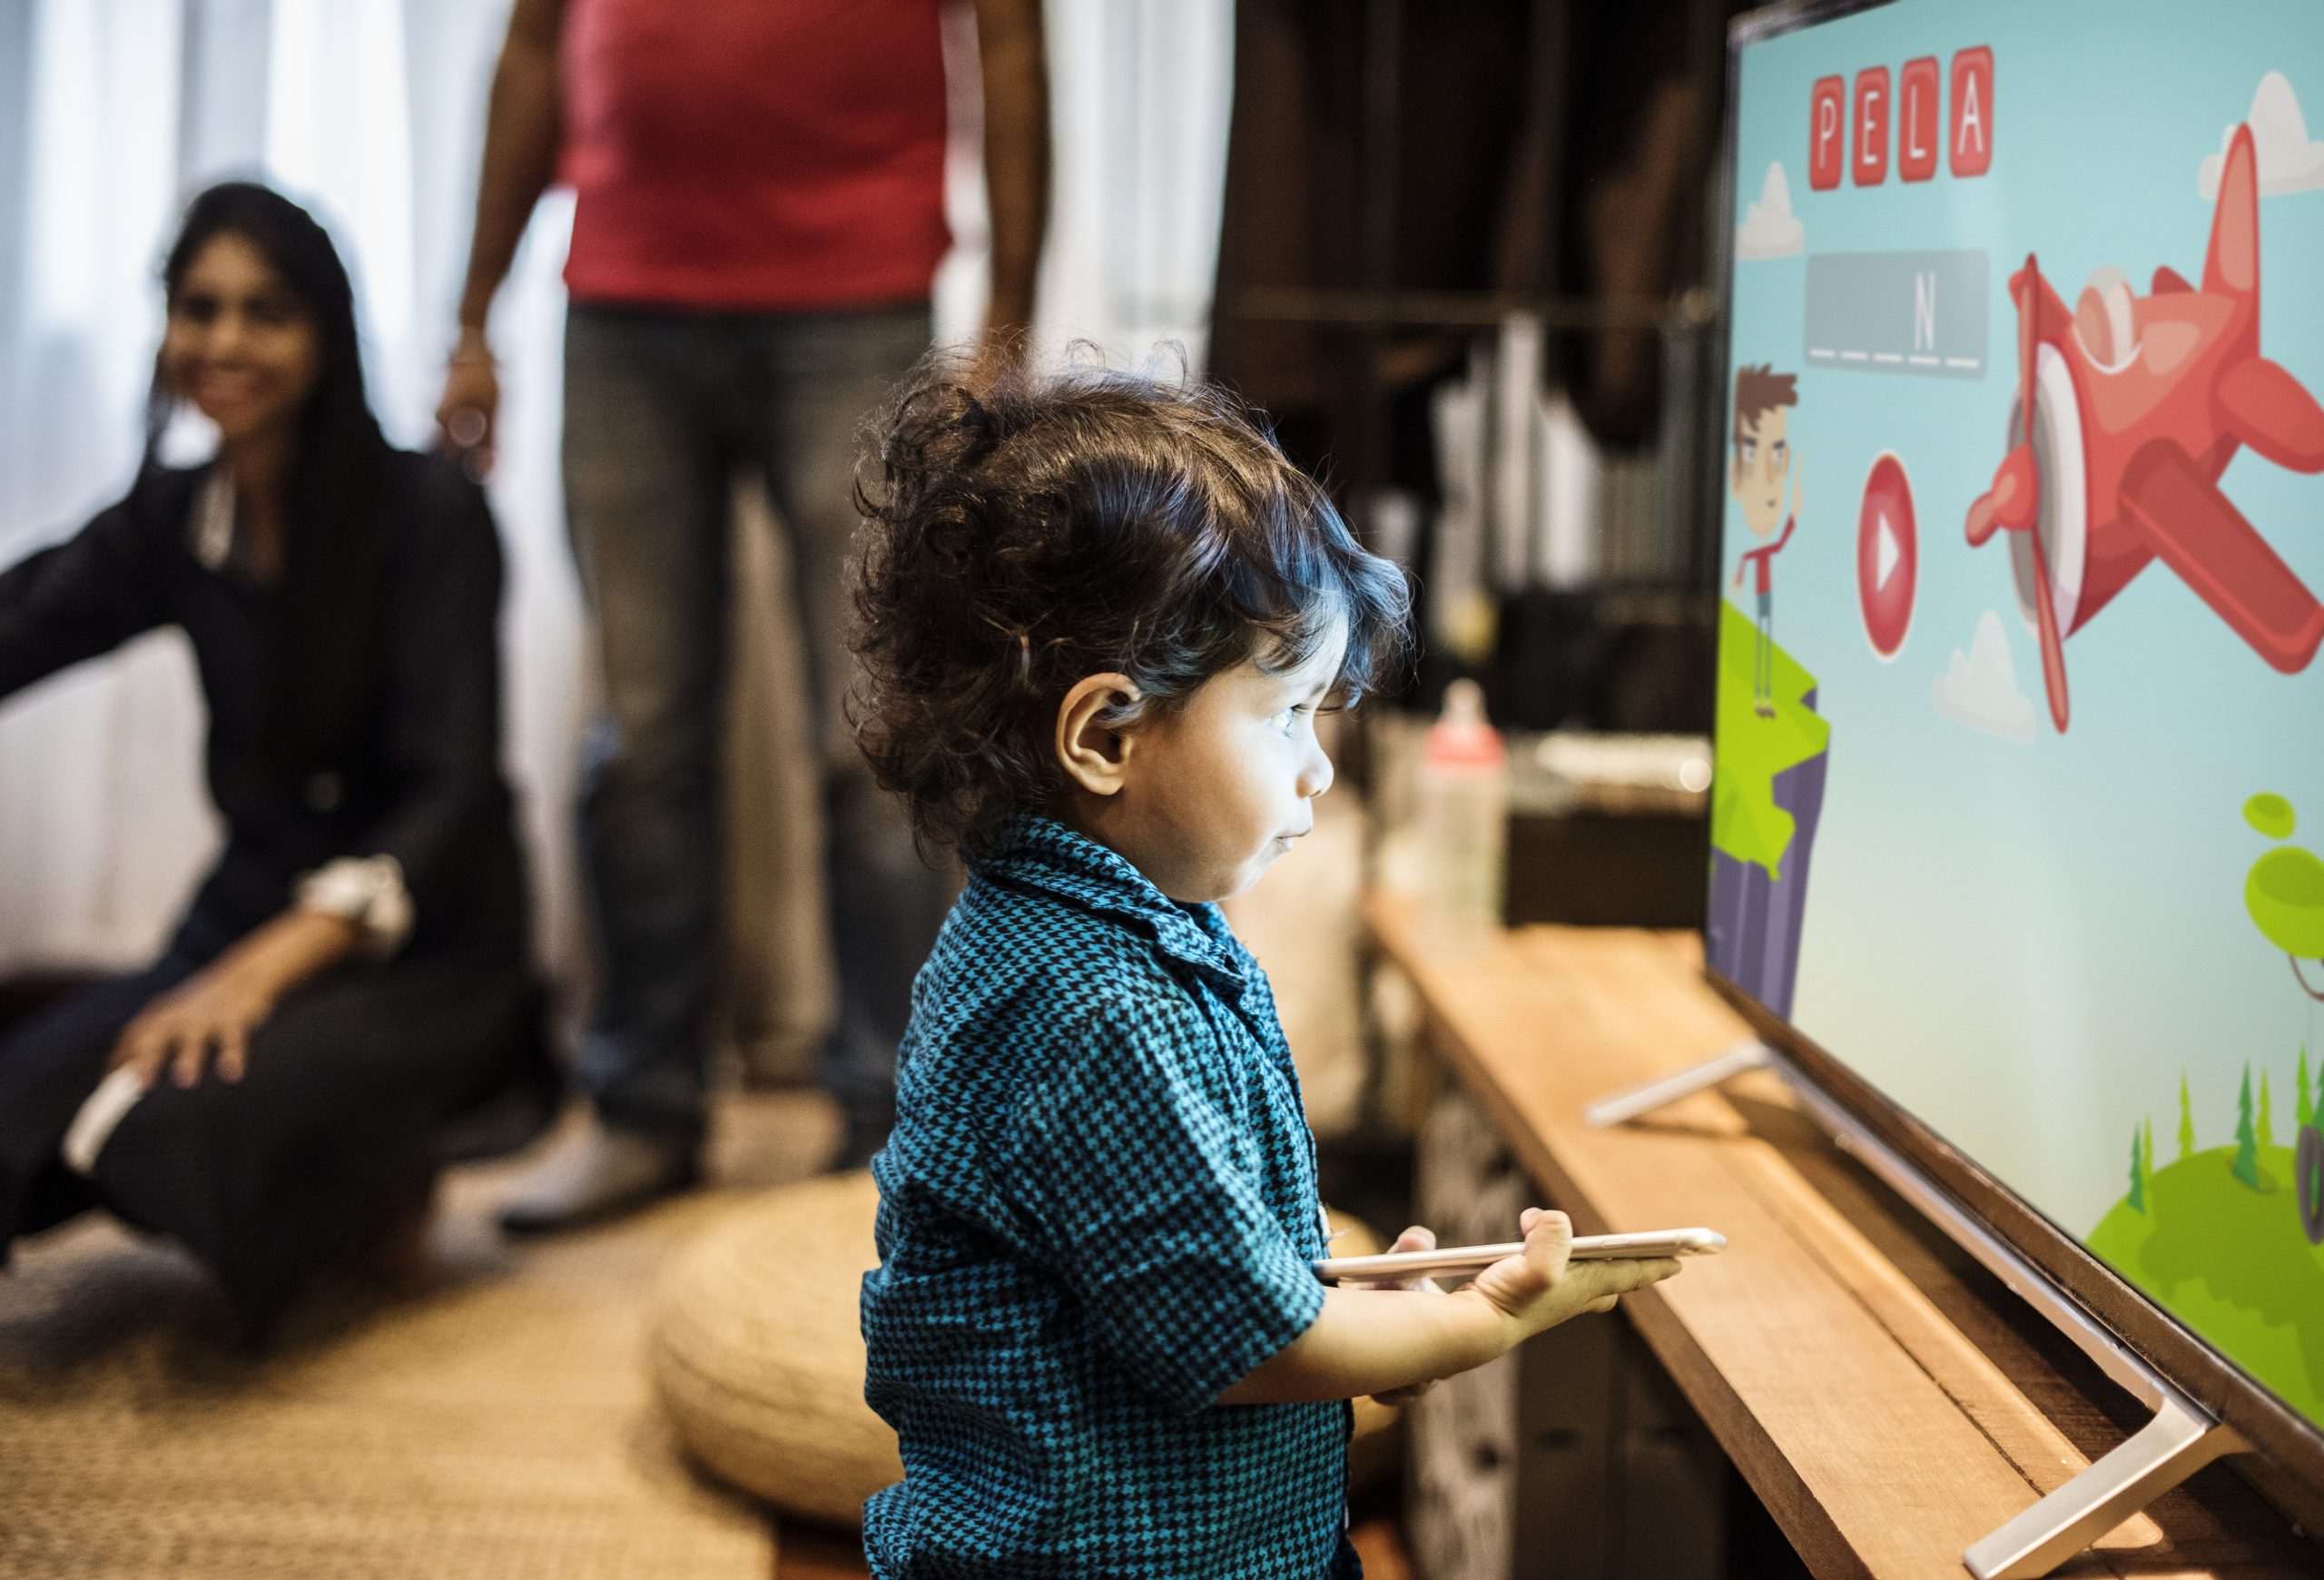 Young boy in front of a television participating in PowerPoint games